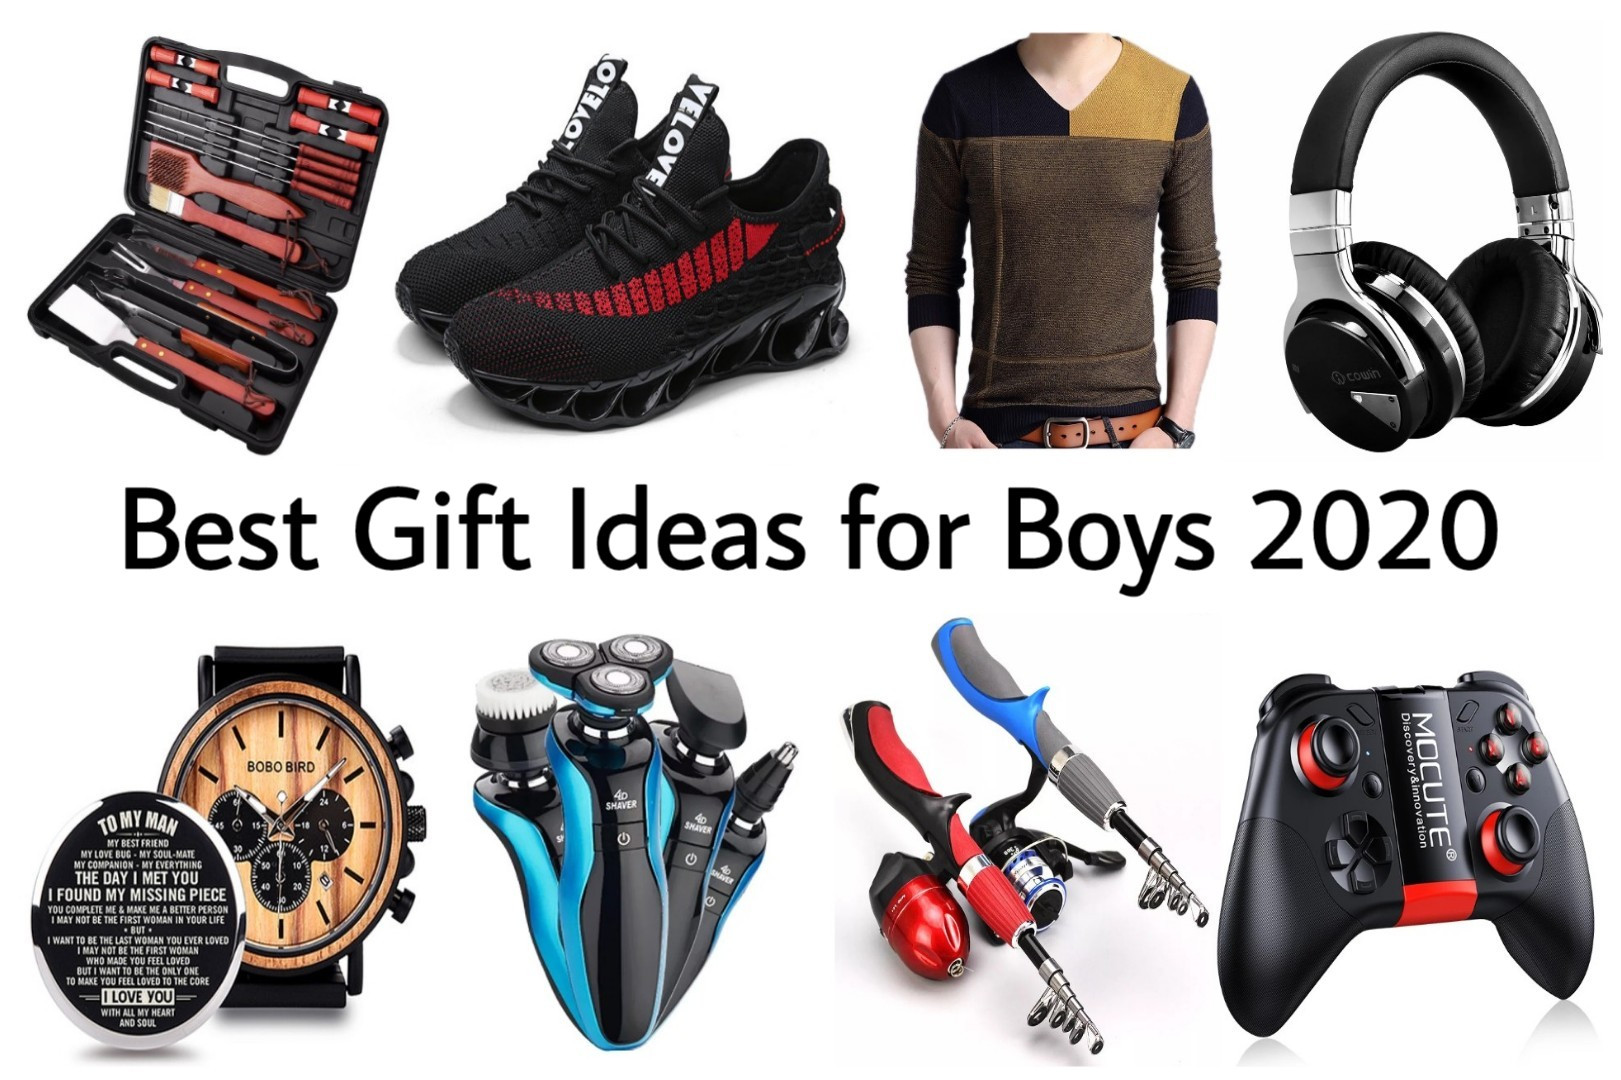 Top Holiday Gift Ideas 2020
 Best Christmas Gifts For Boyfriend 2020